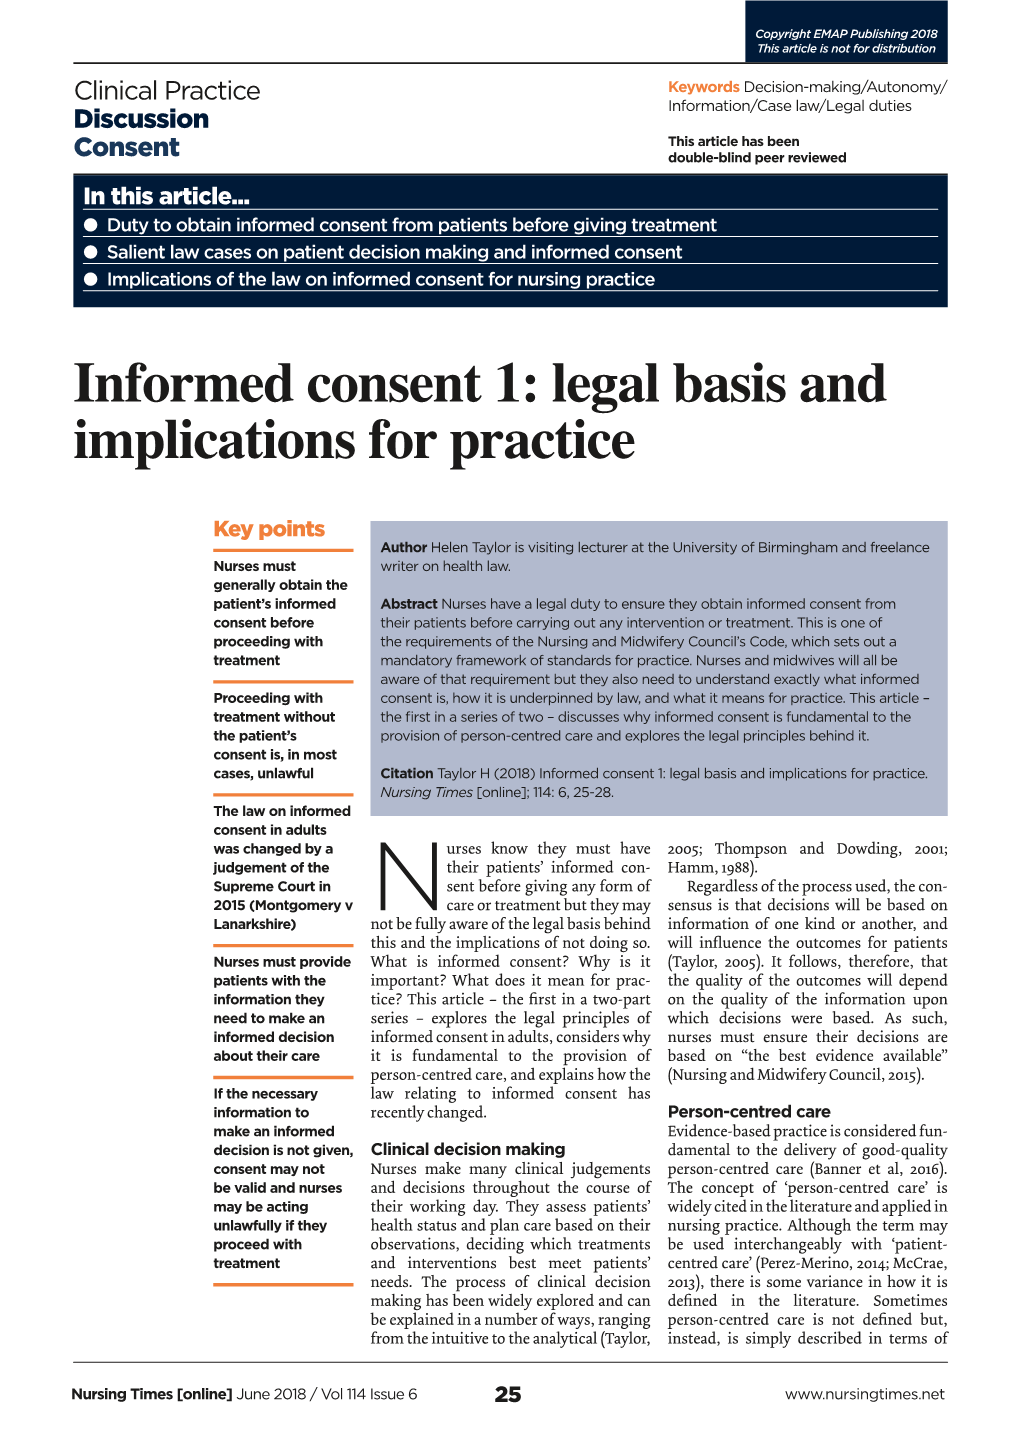 Informed Consent 1: Legal Basis and Implications for Practice